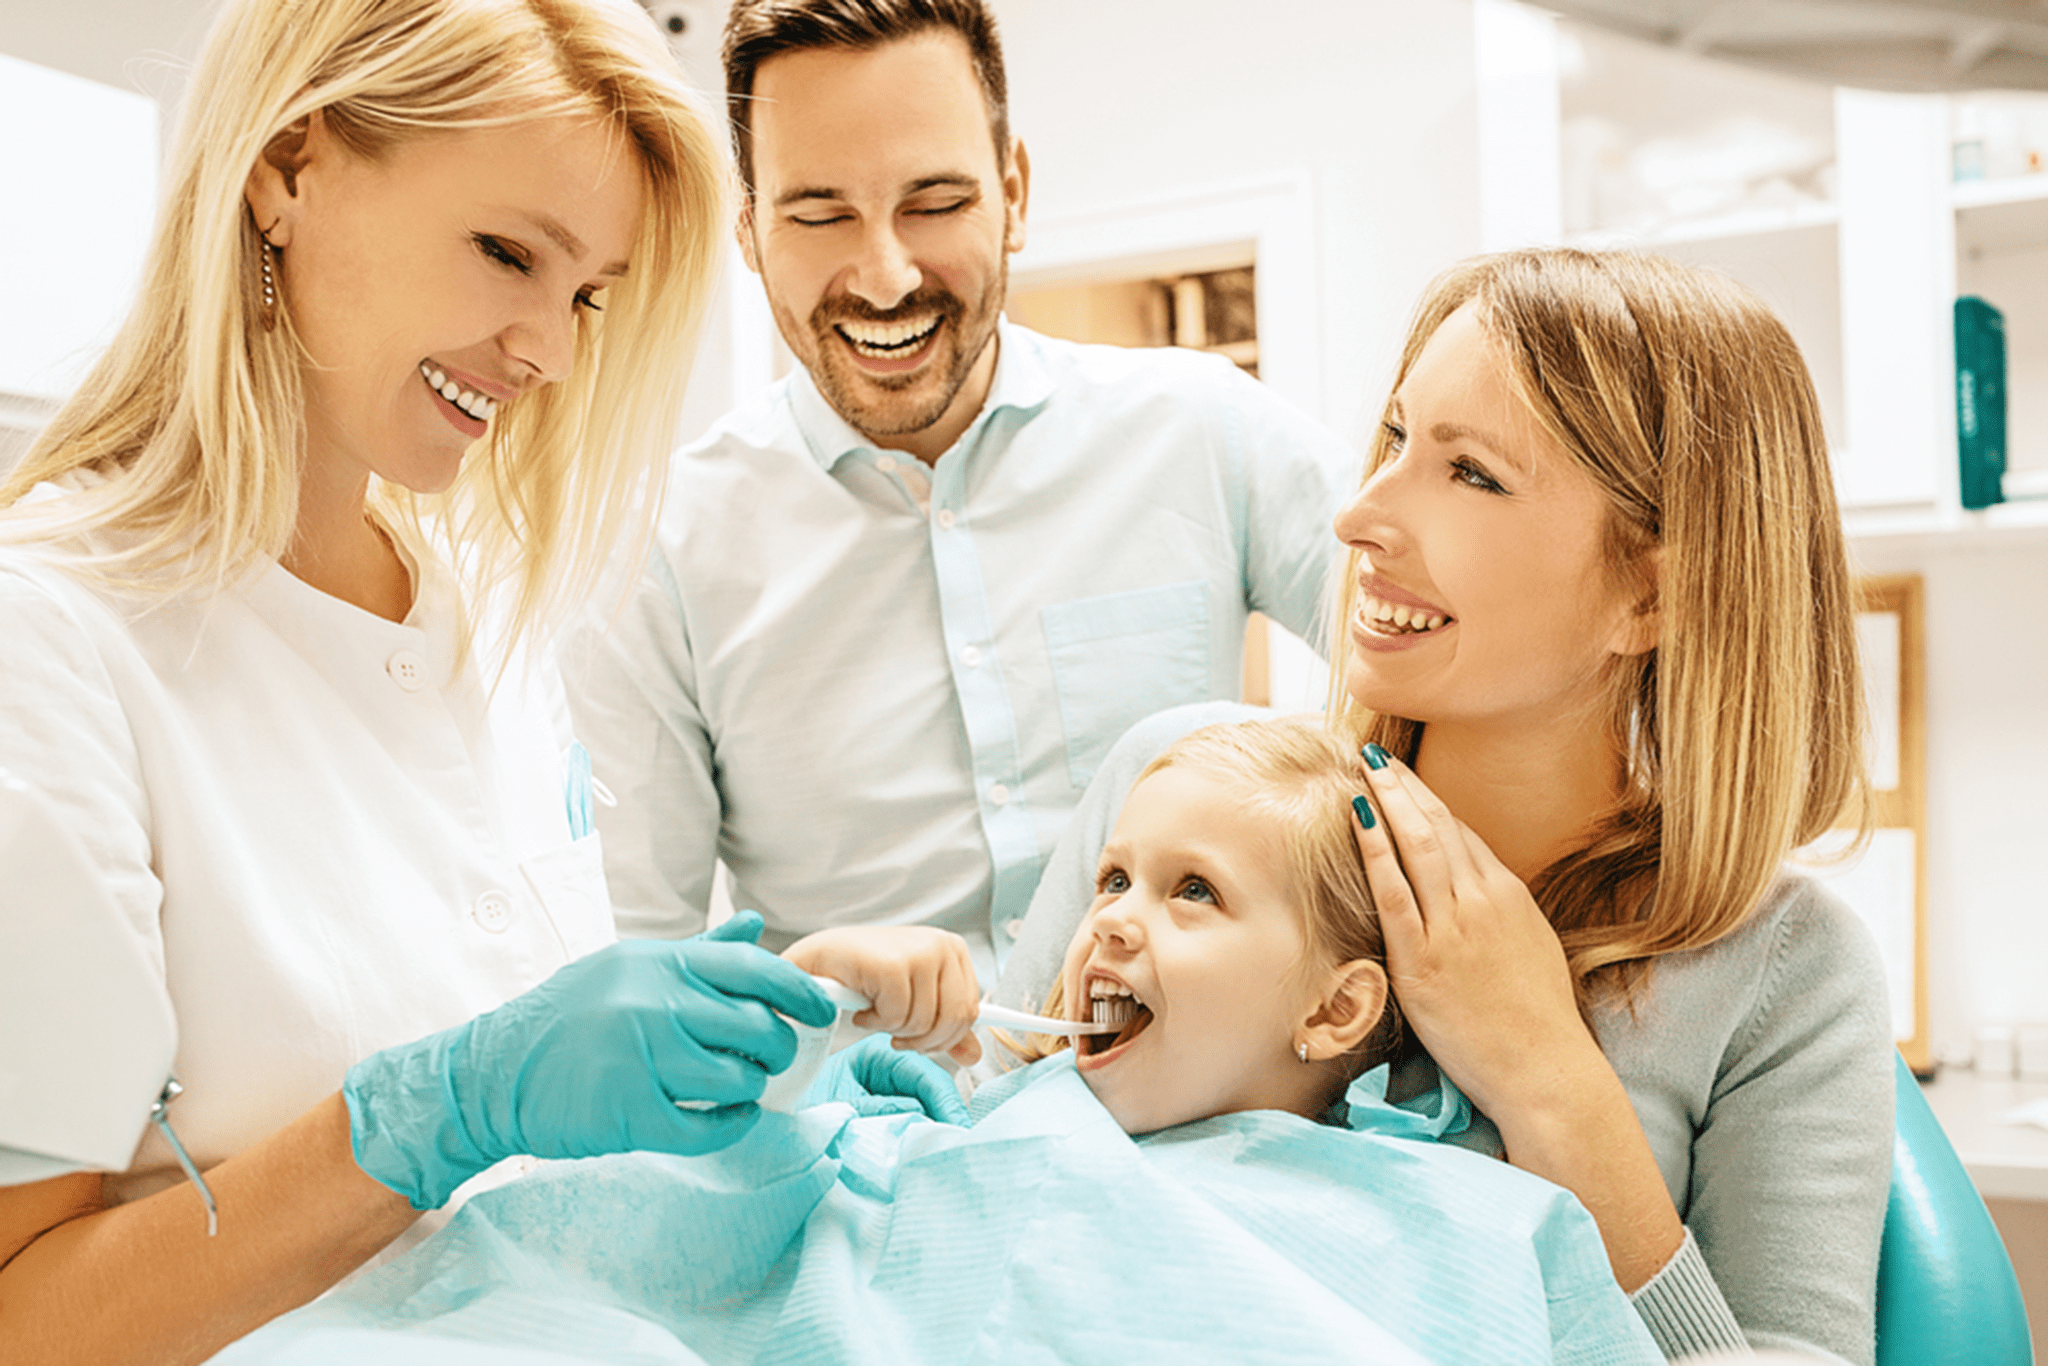 Five Common Dental Issues Your Family Dentist in Shelby Township, MI Can Treat